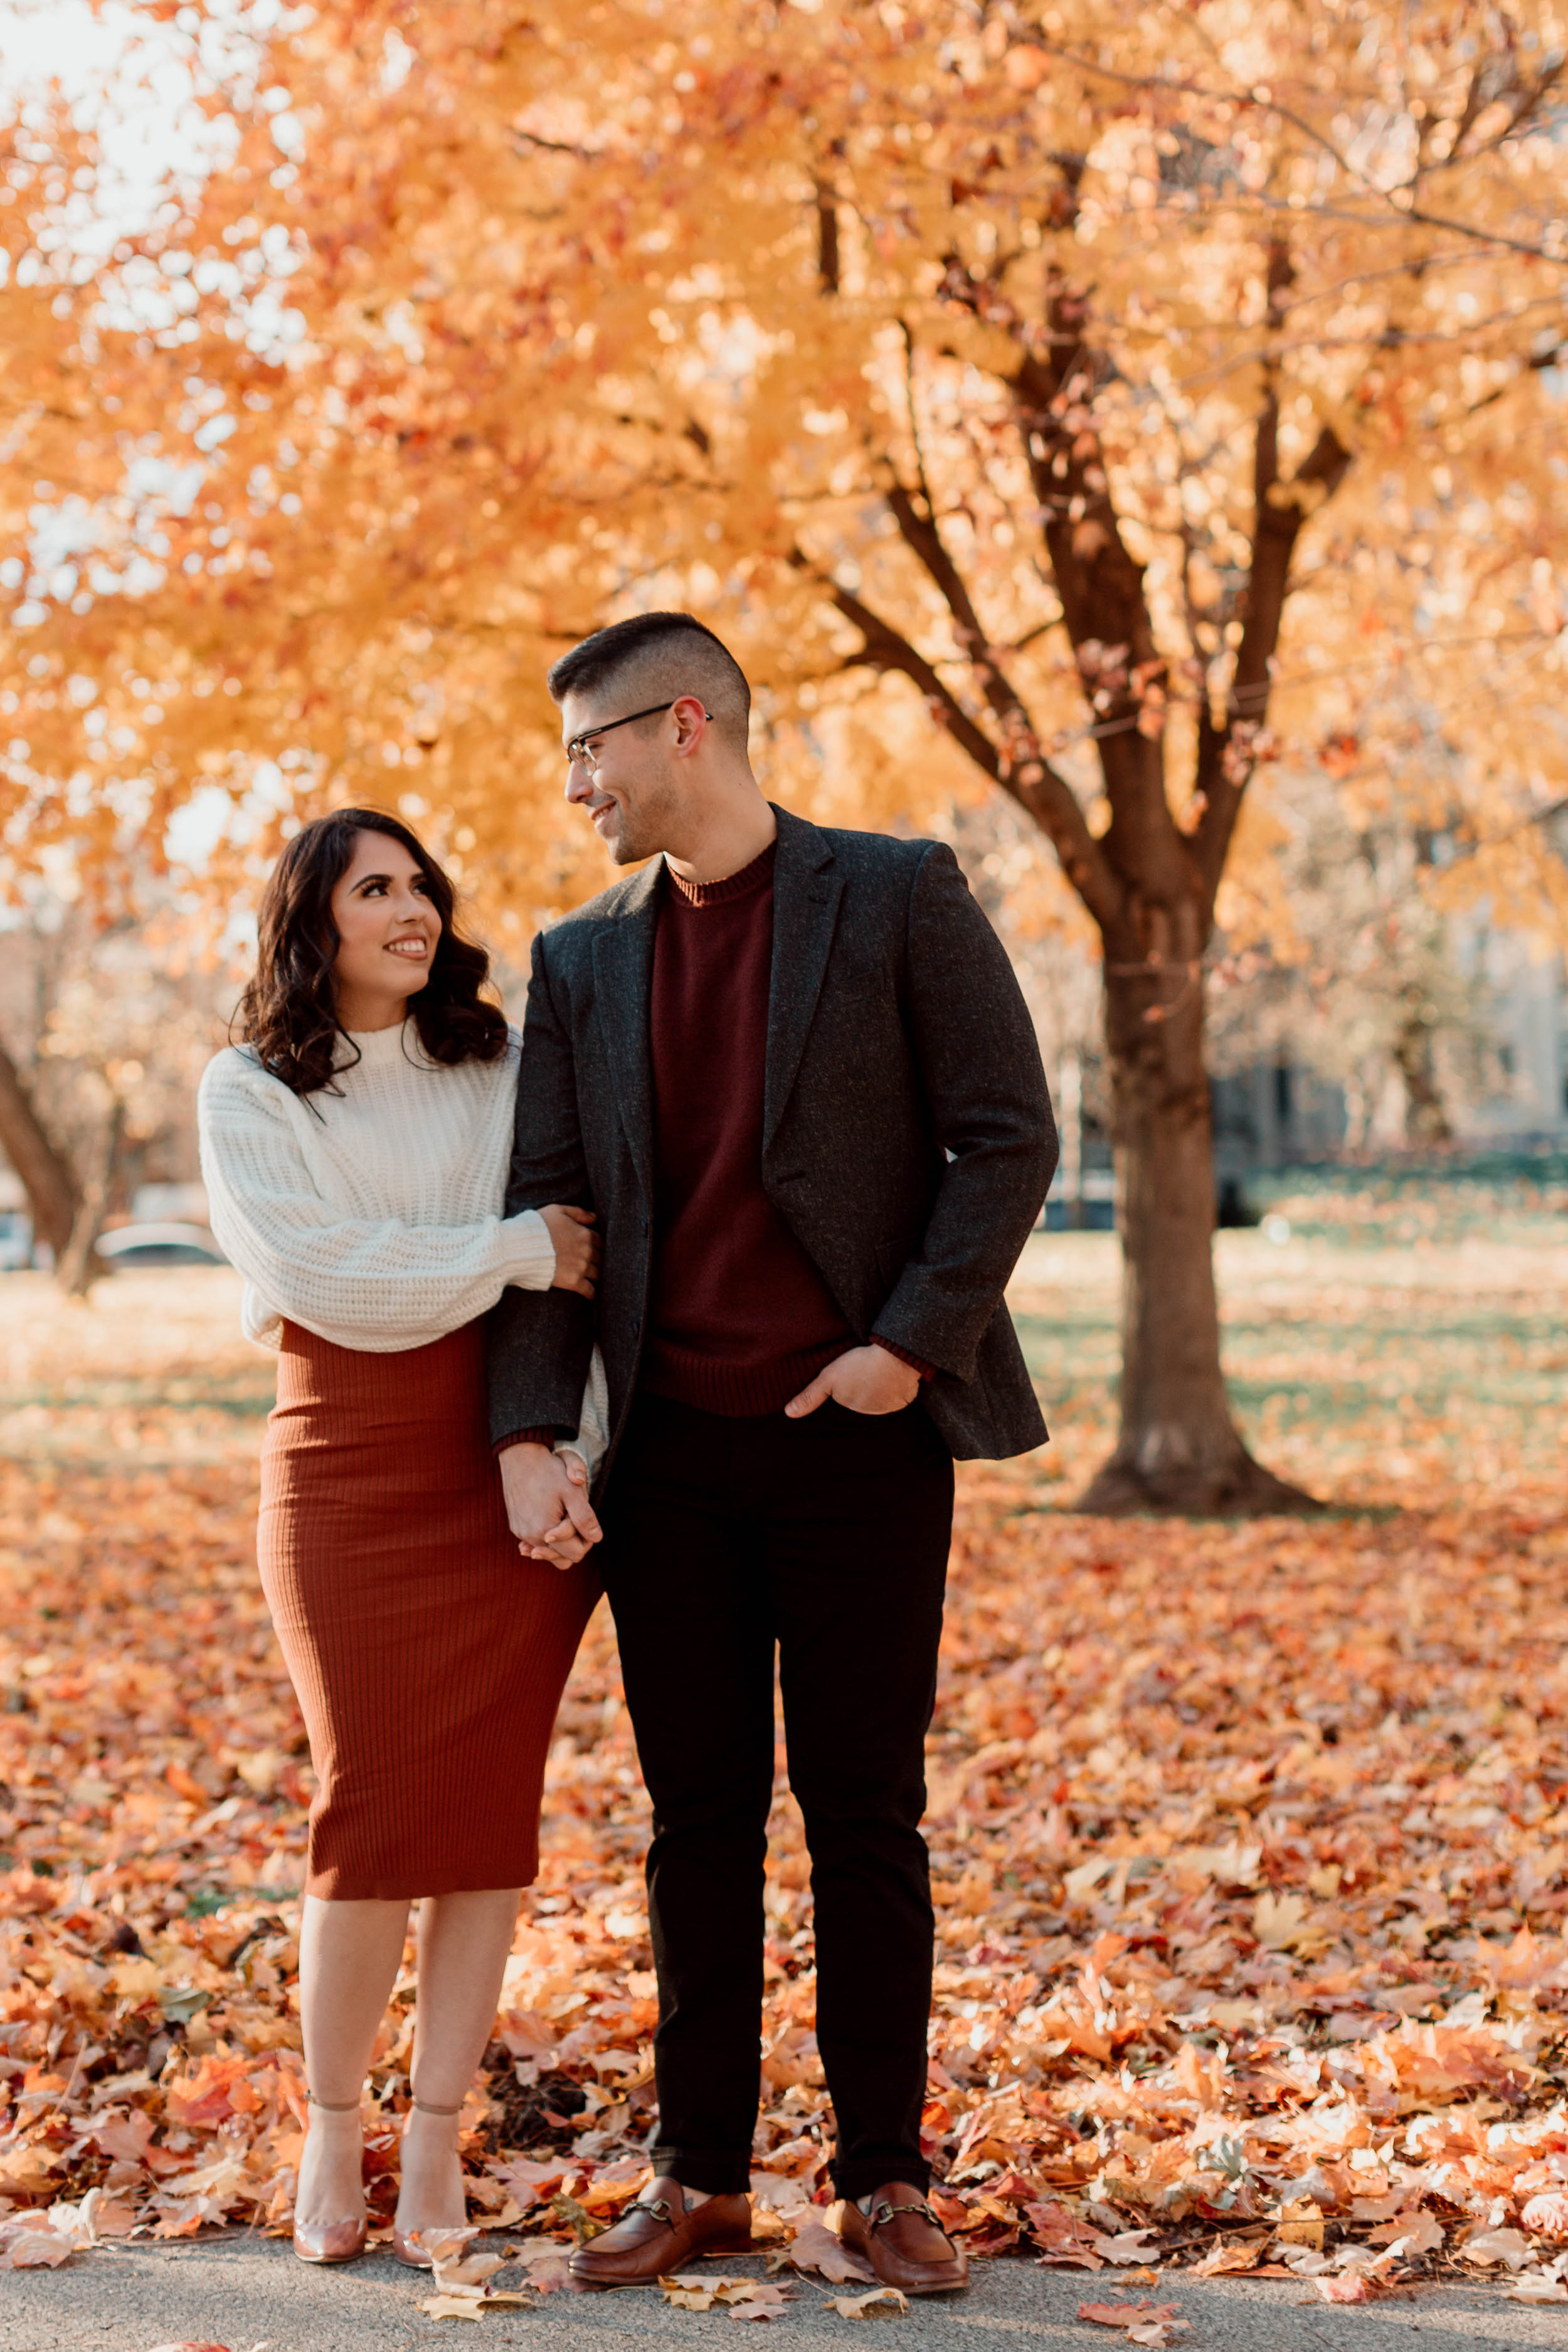 Locations for fall engagement photos in Chicago - Garden of the Phoenix
